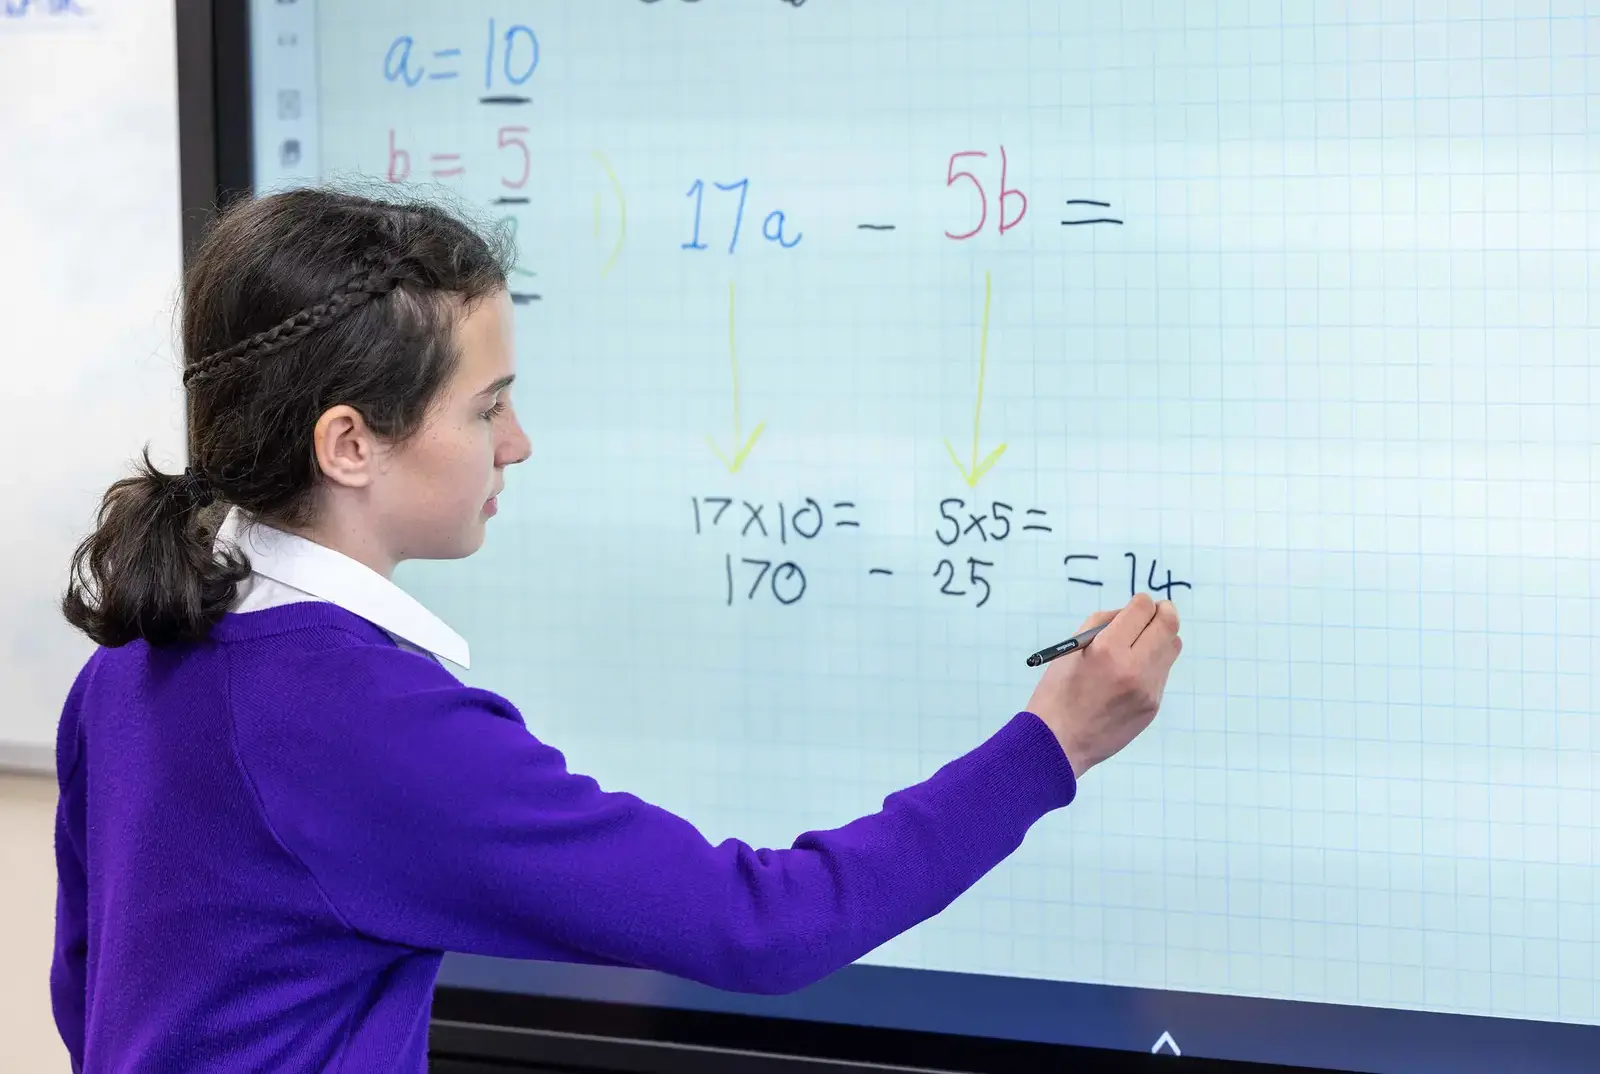 A King's Magna pupil writing on the digital whiteboard in maths class